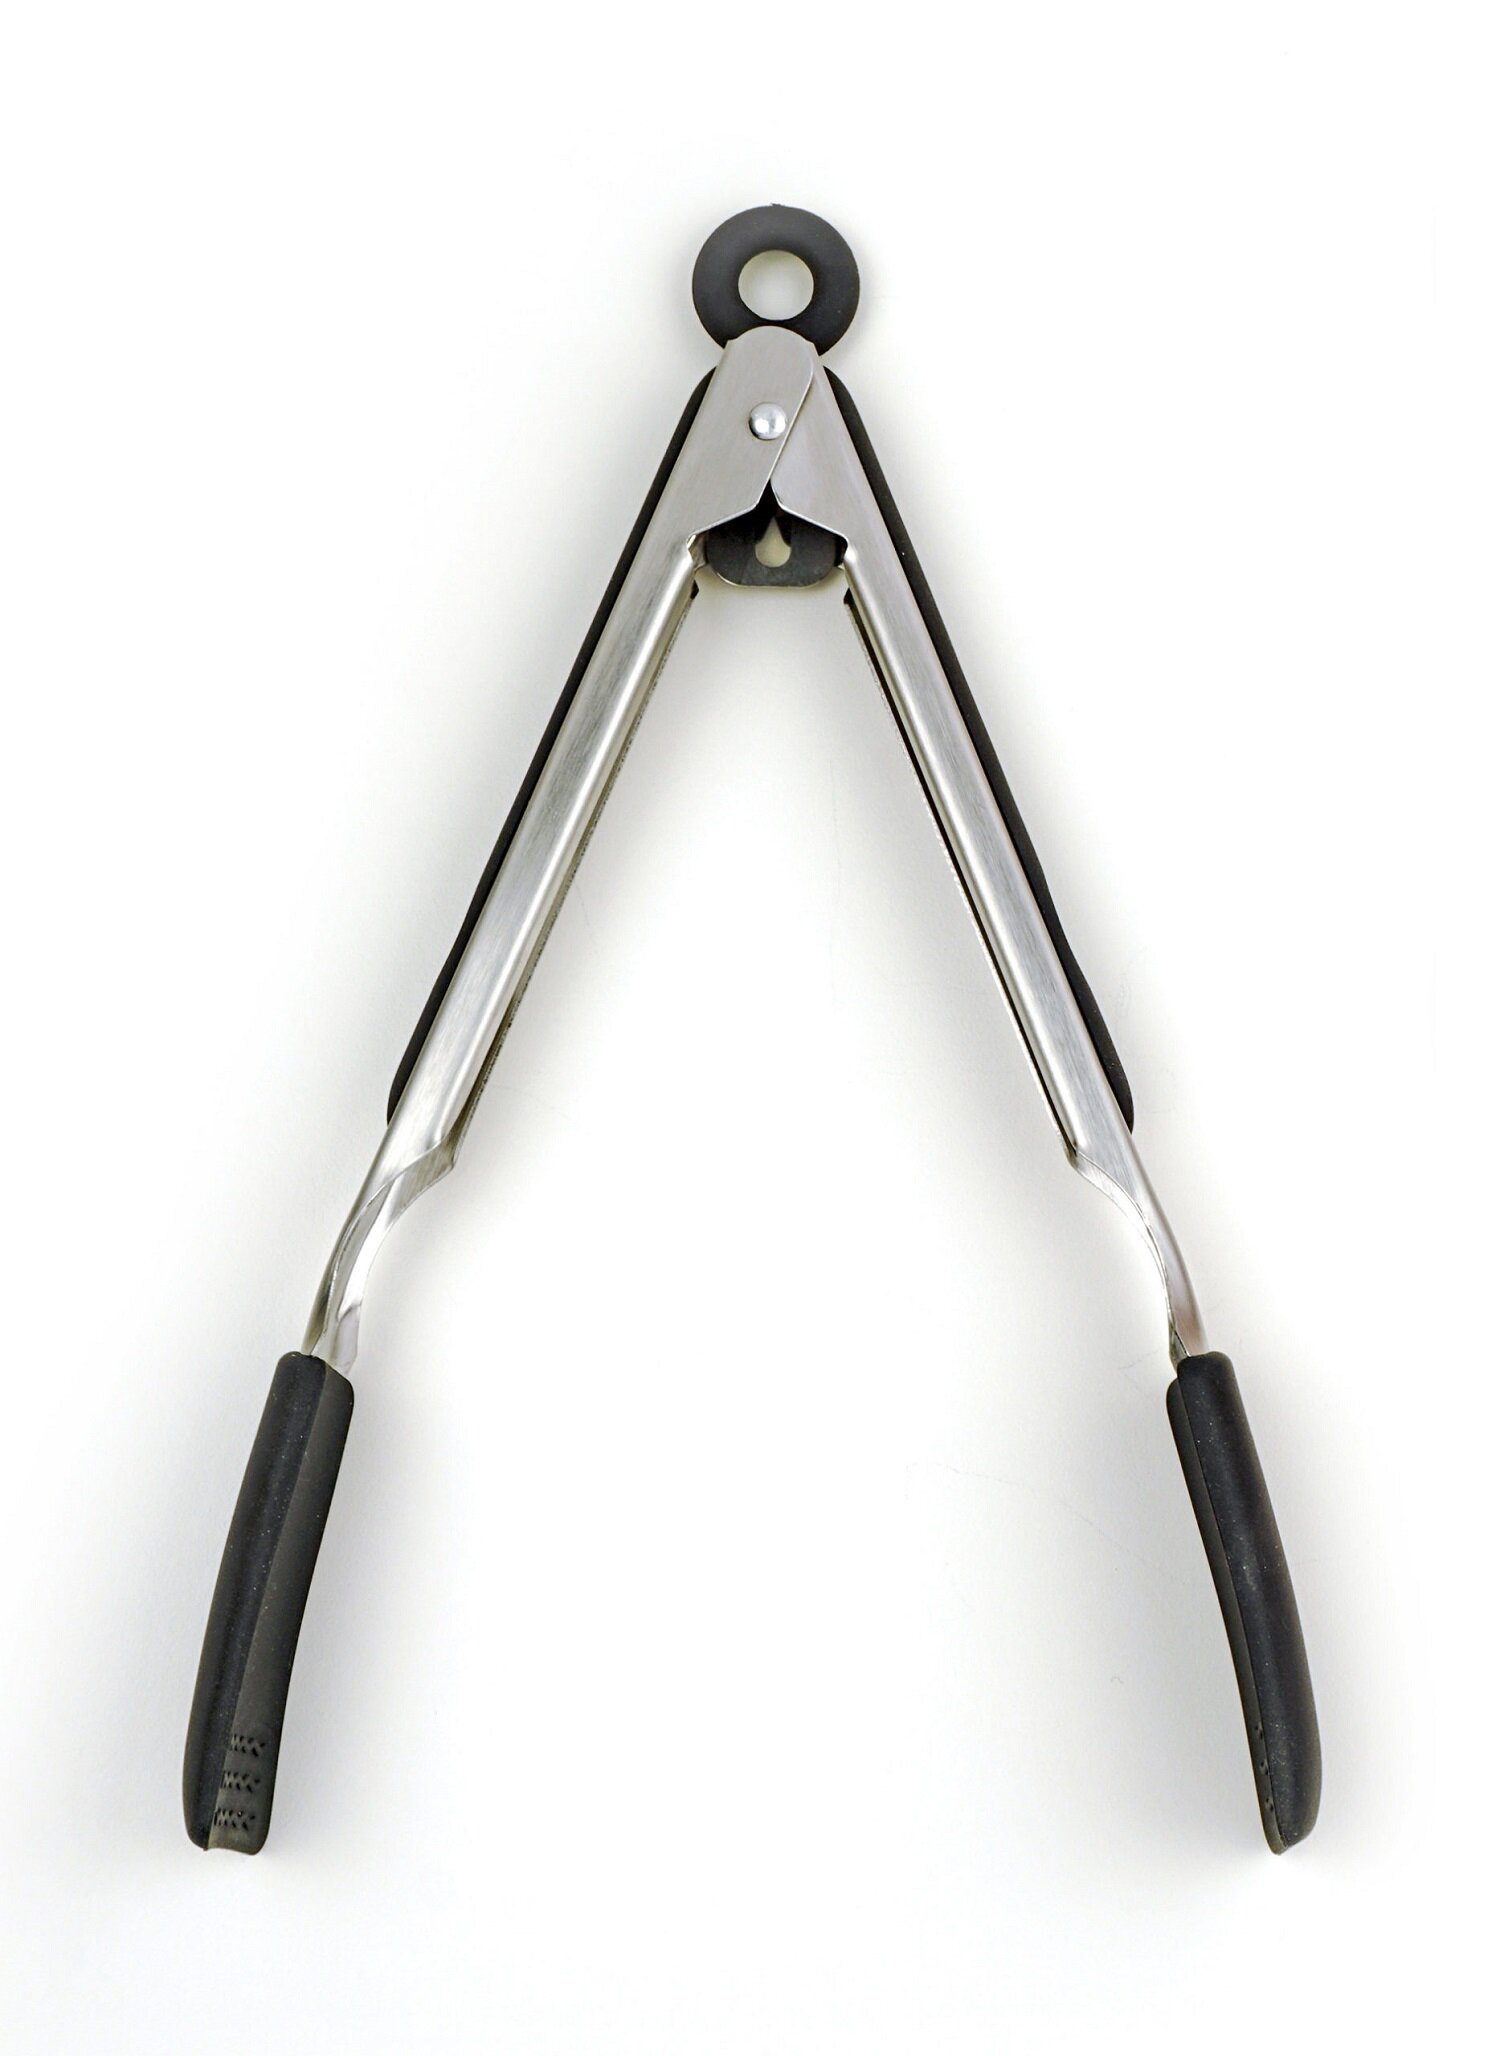 Kitchen Tongs, Silicone/Stainless Steel, 18 In.